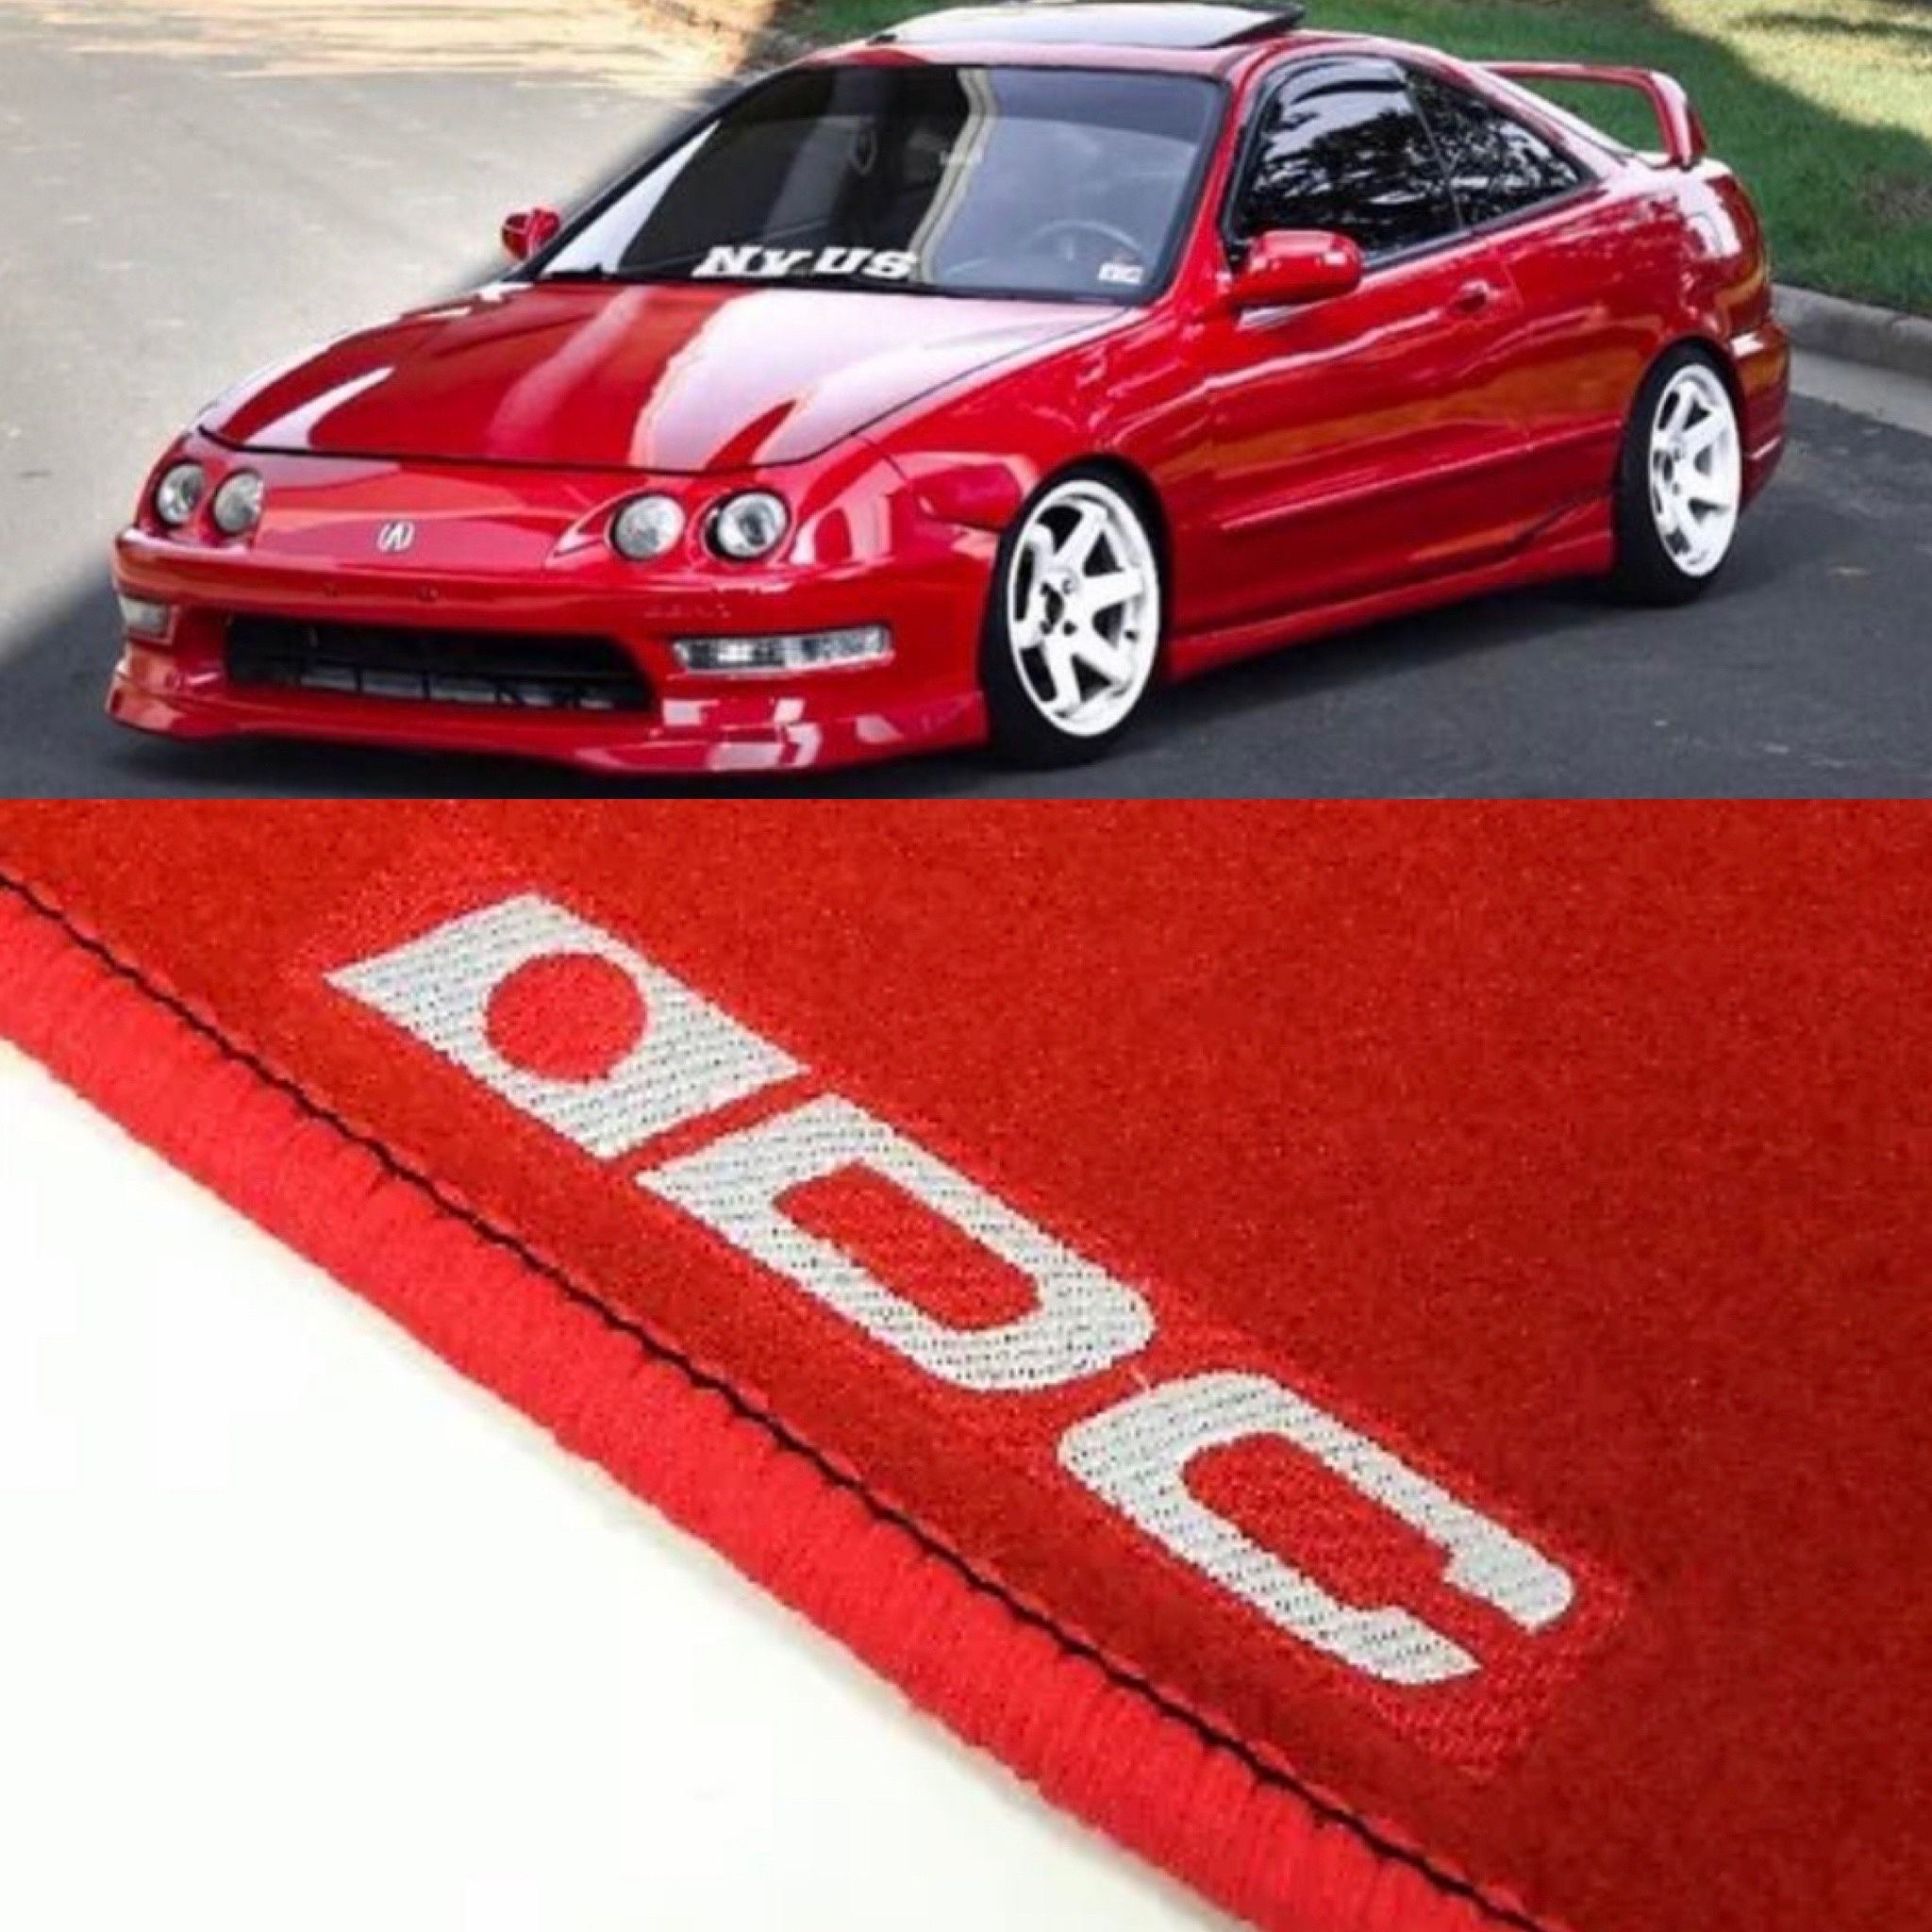 Floor Mats For Acura Integra Fits 1994 through 2001 Front and Rear The Two Fronts Have DC Logo